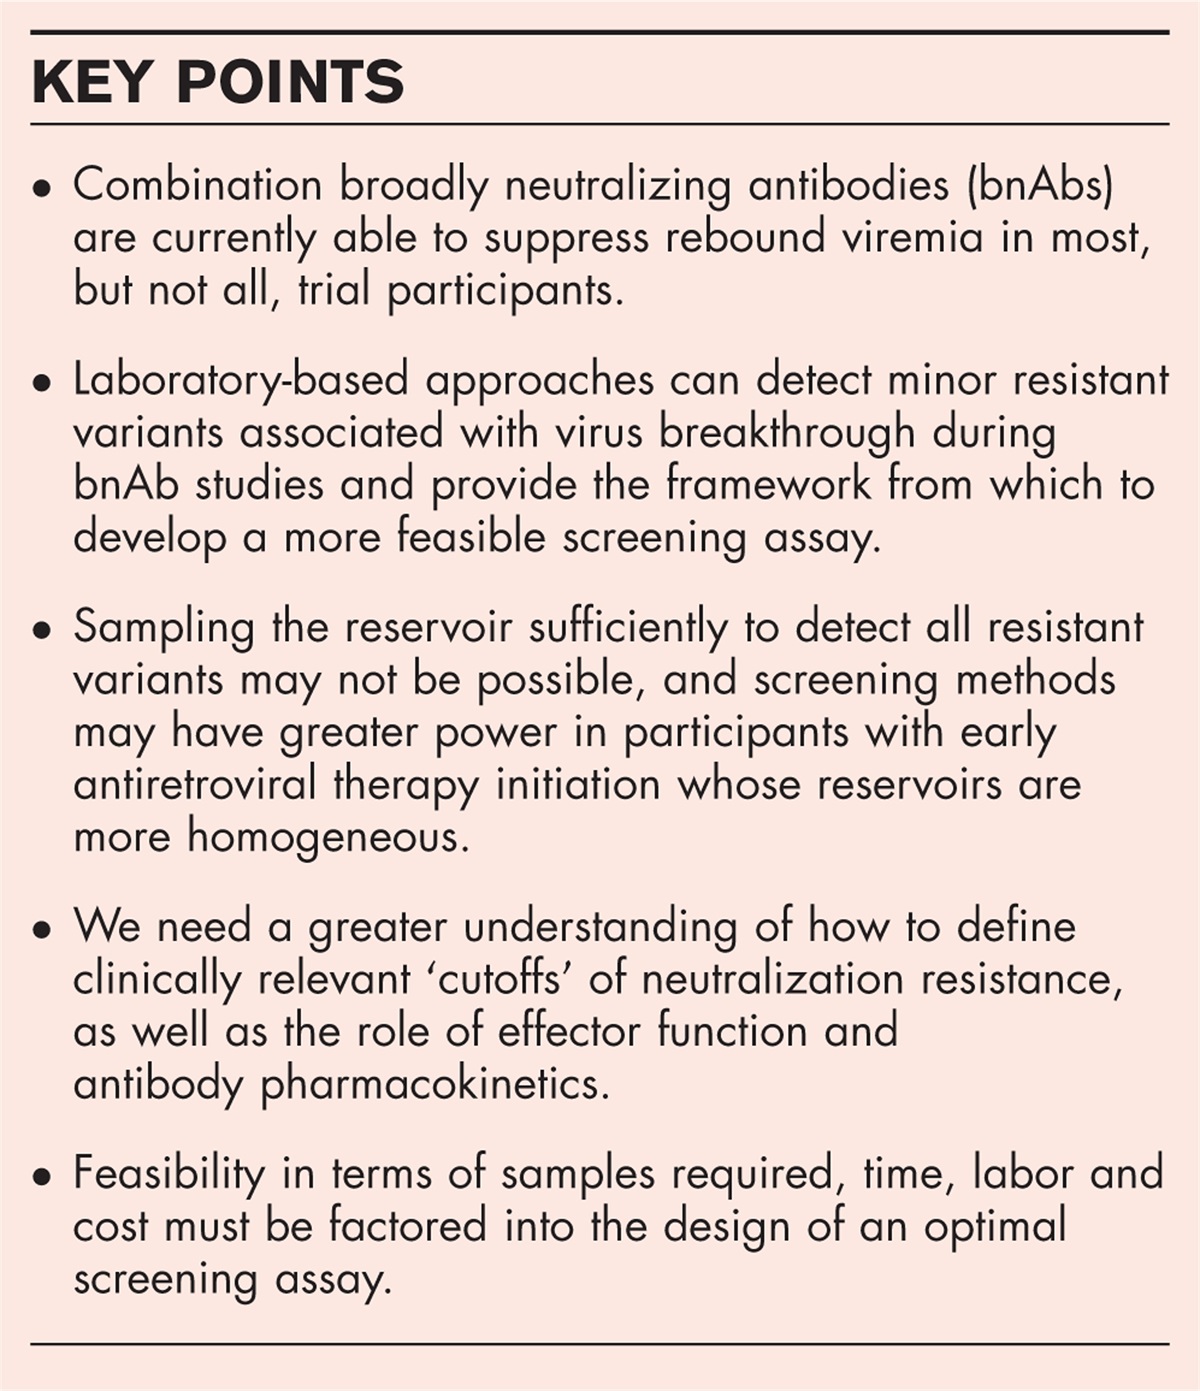 Development of screening assays for use of broadly neutralizing antibodies in people with HIV